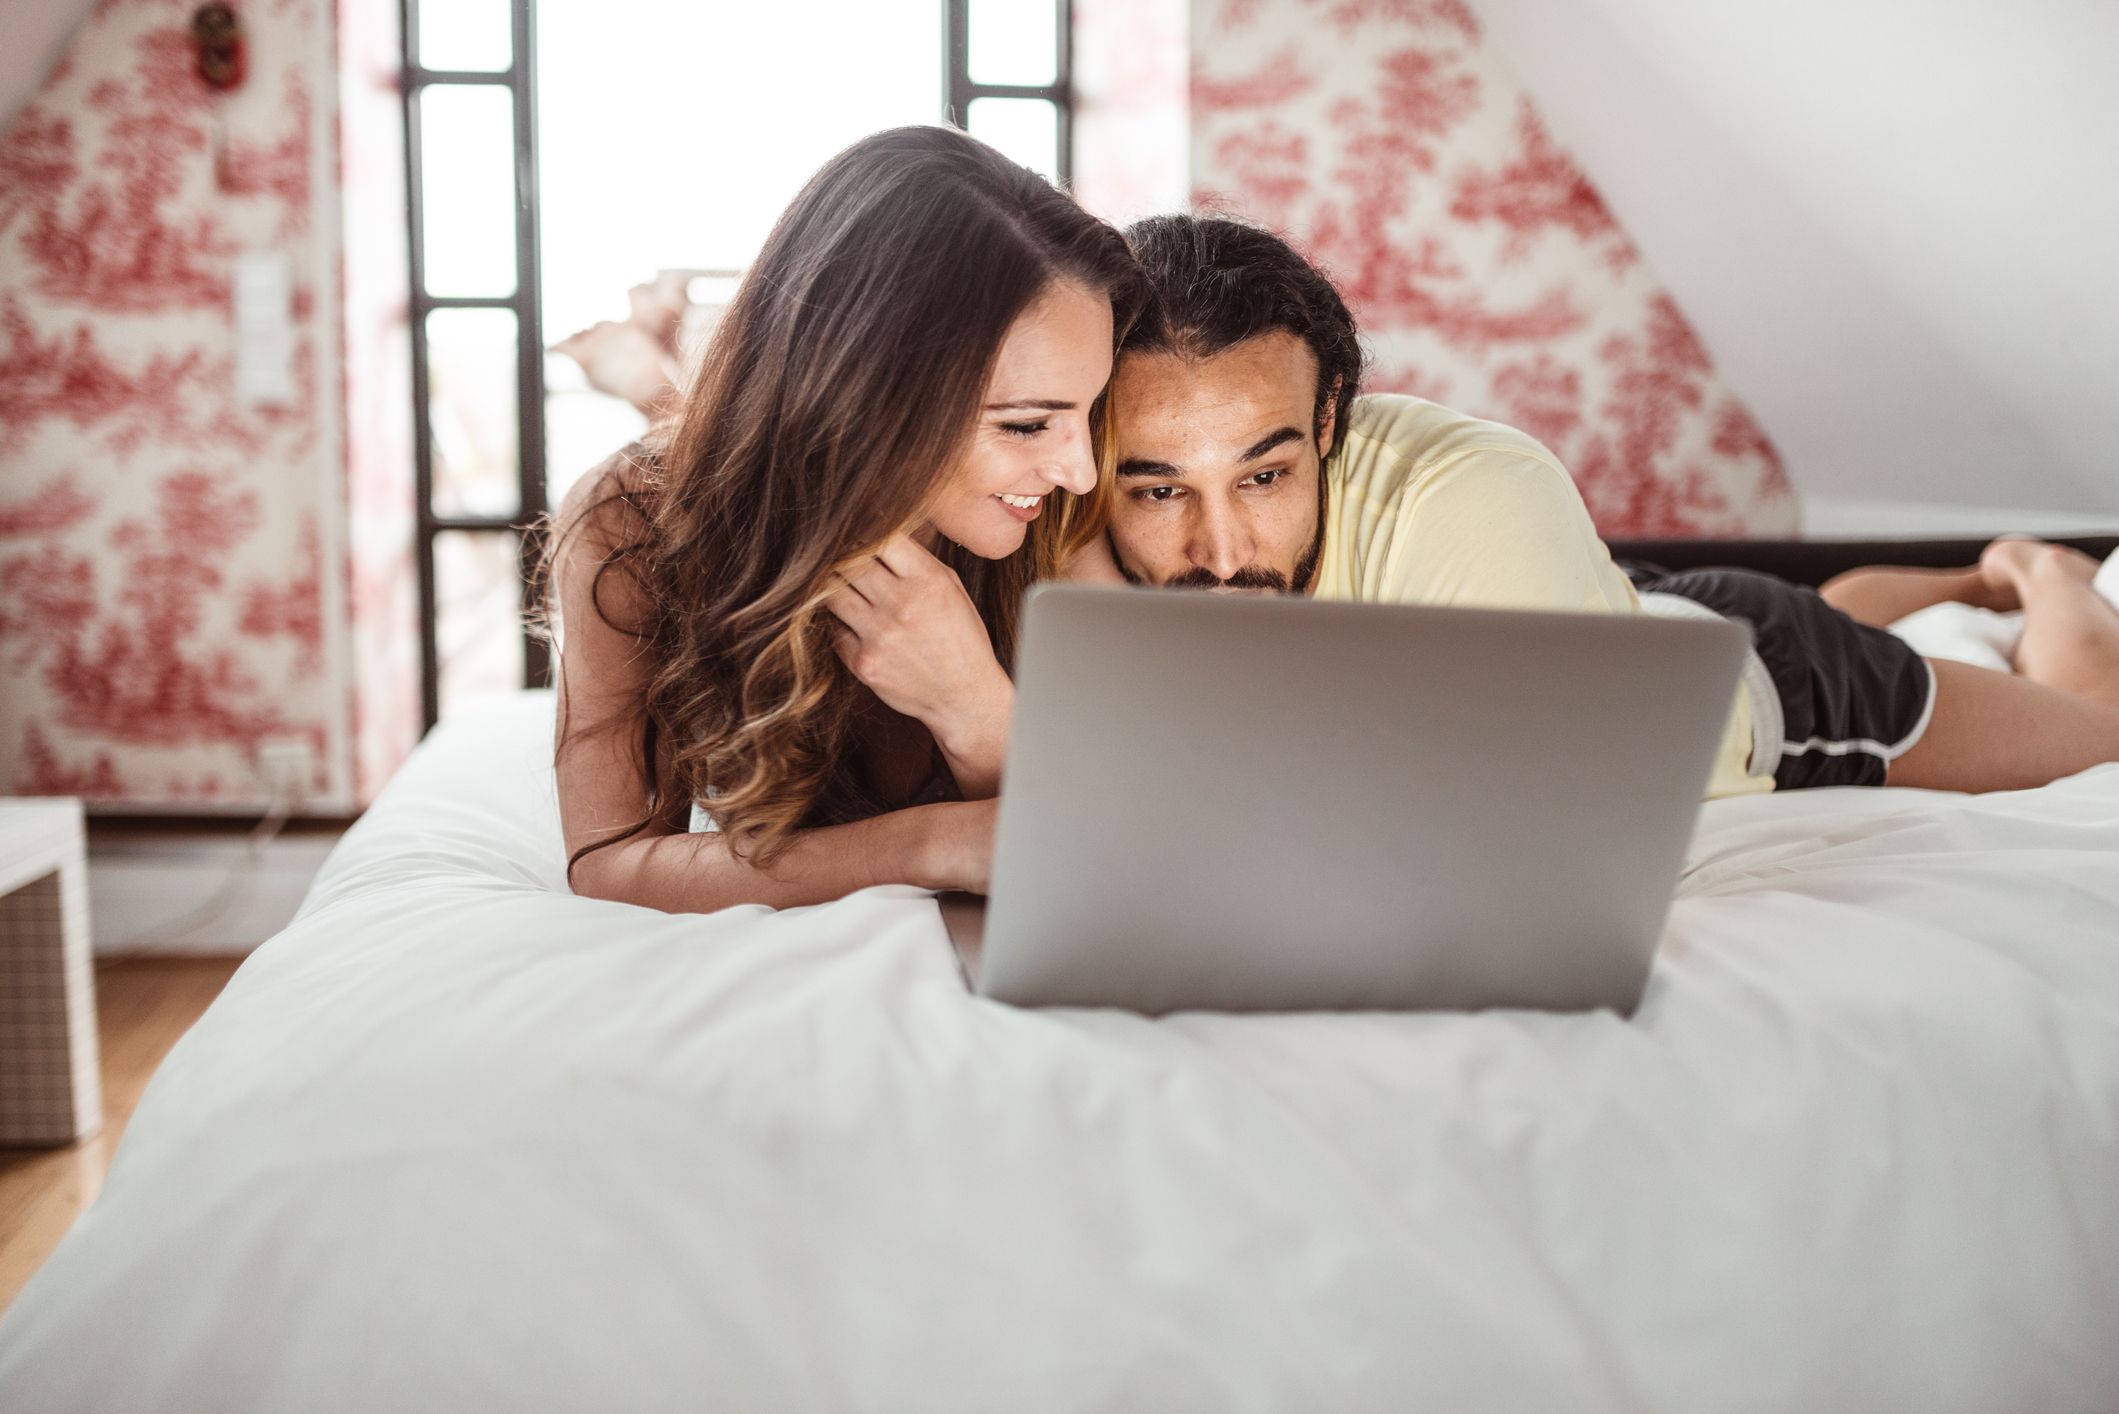 7 Most Popular Types of Porn, Explained